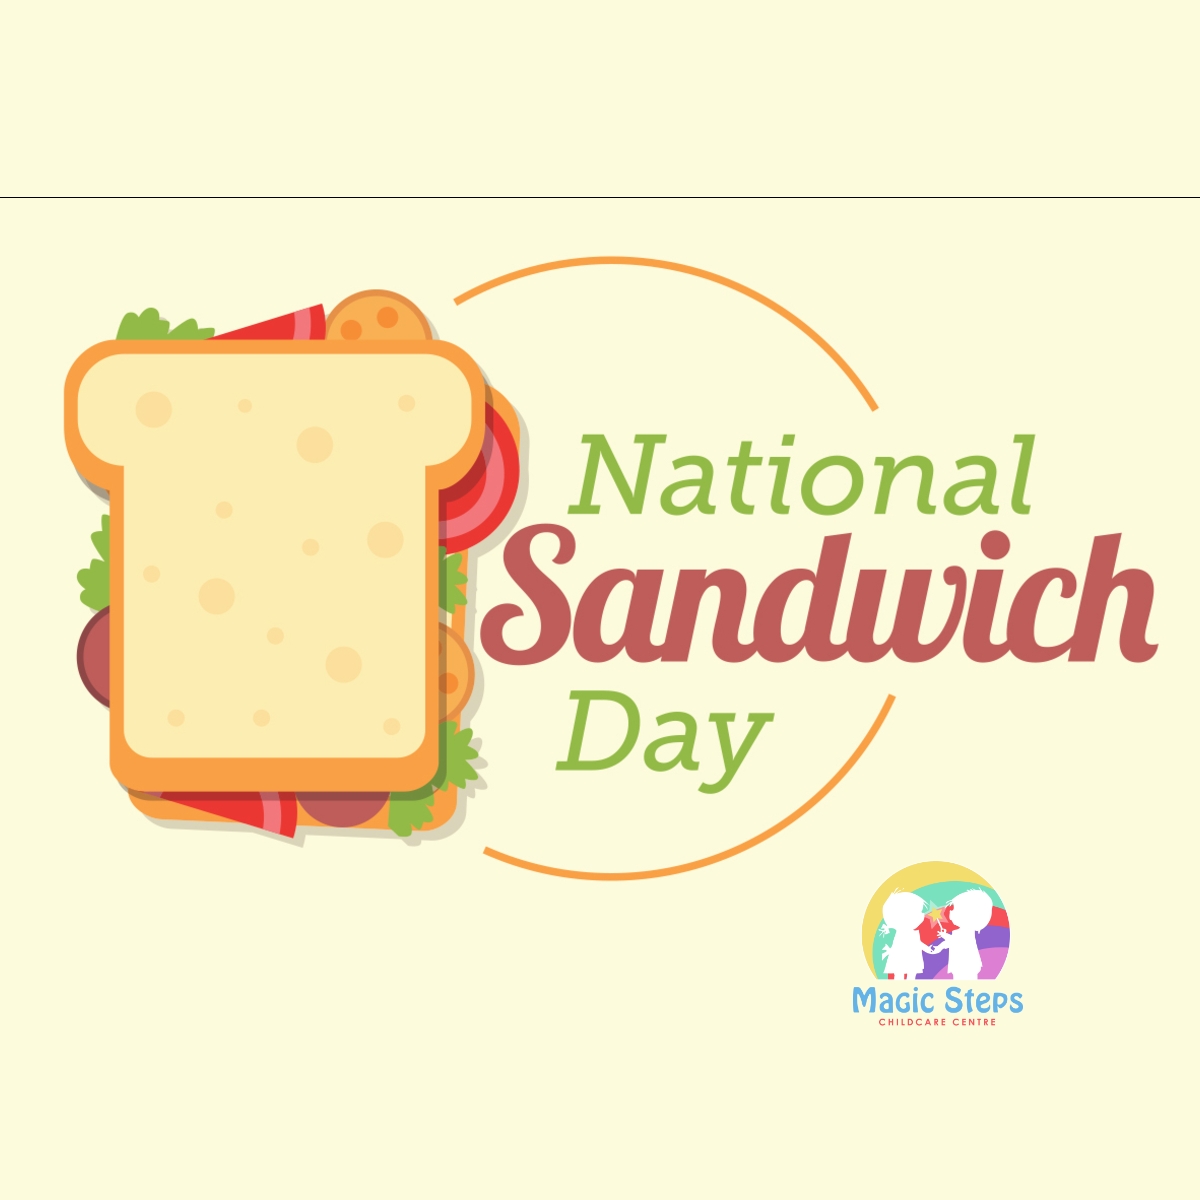 National Sandwich Day- Tuesday 2nd November